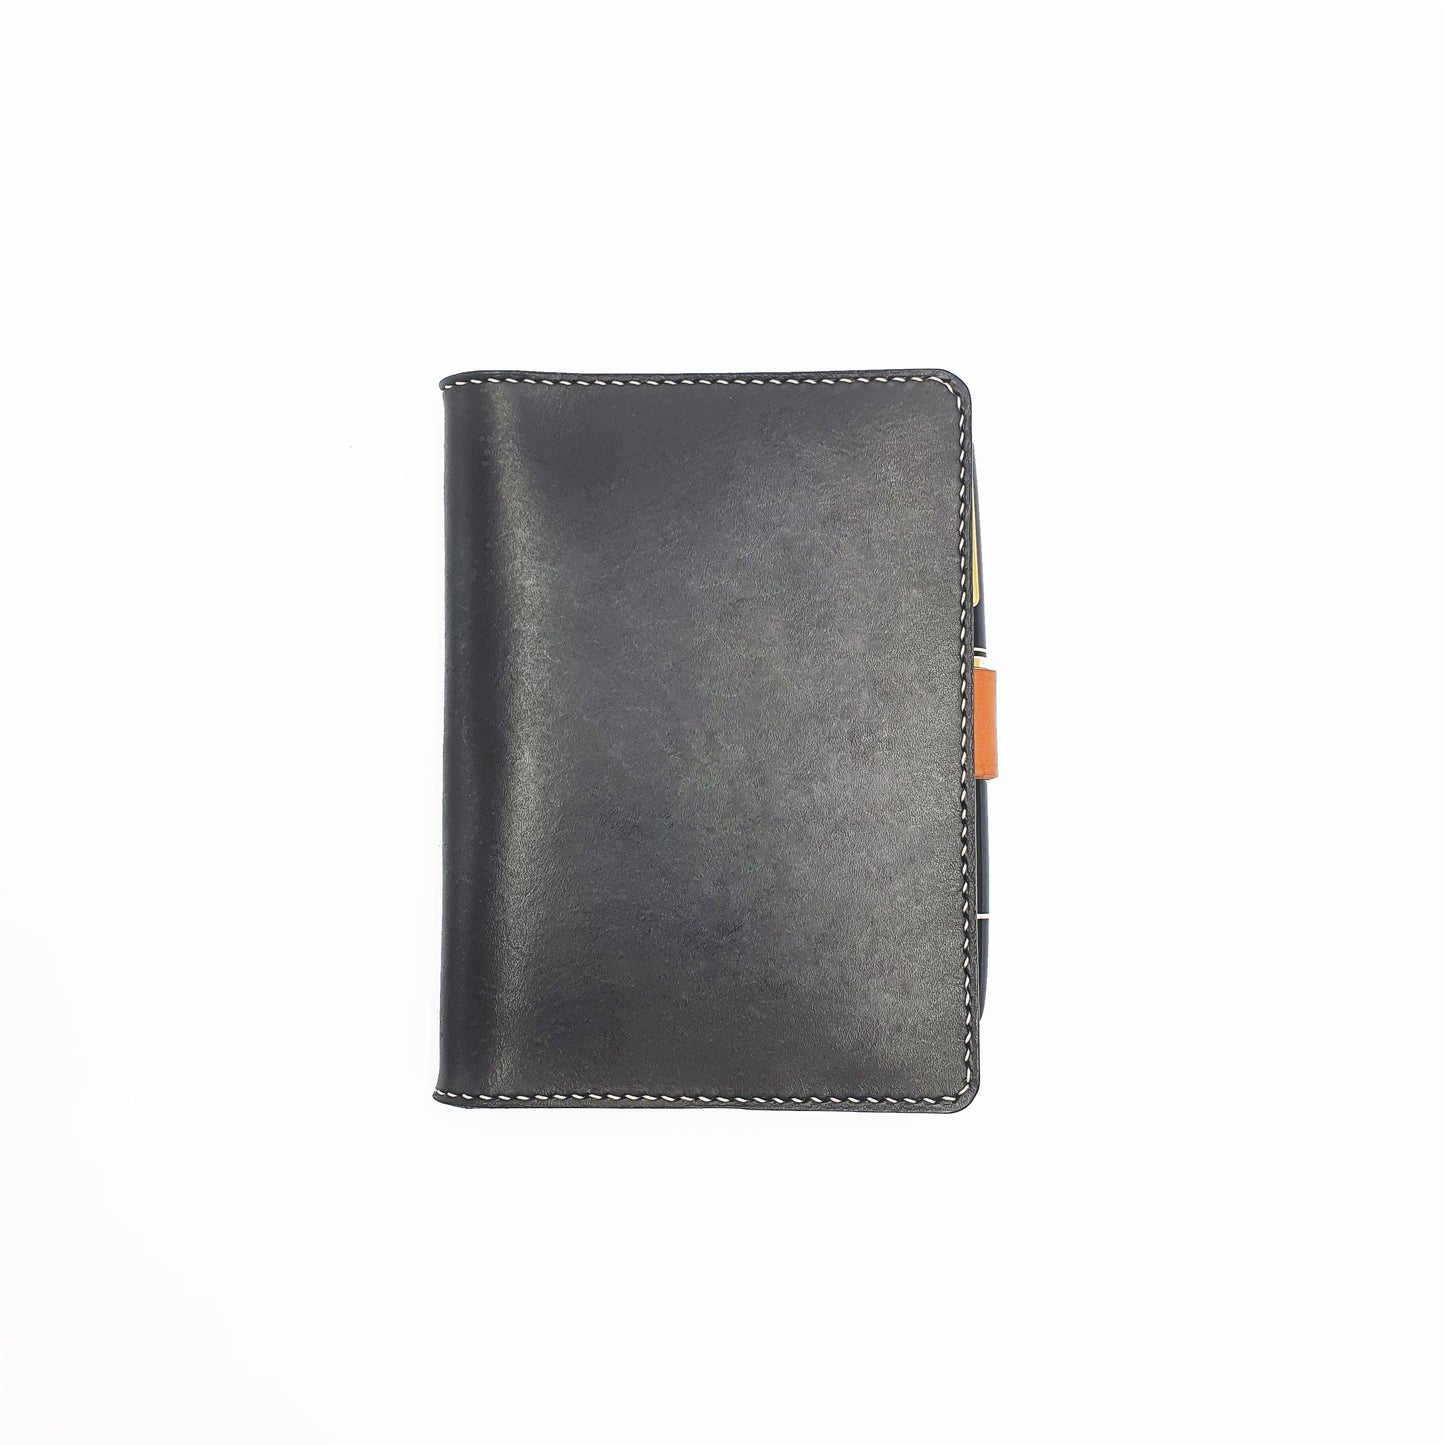 ROHE II A6-P Leather Notebook Sleeve